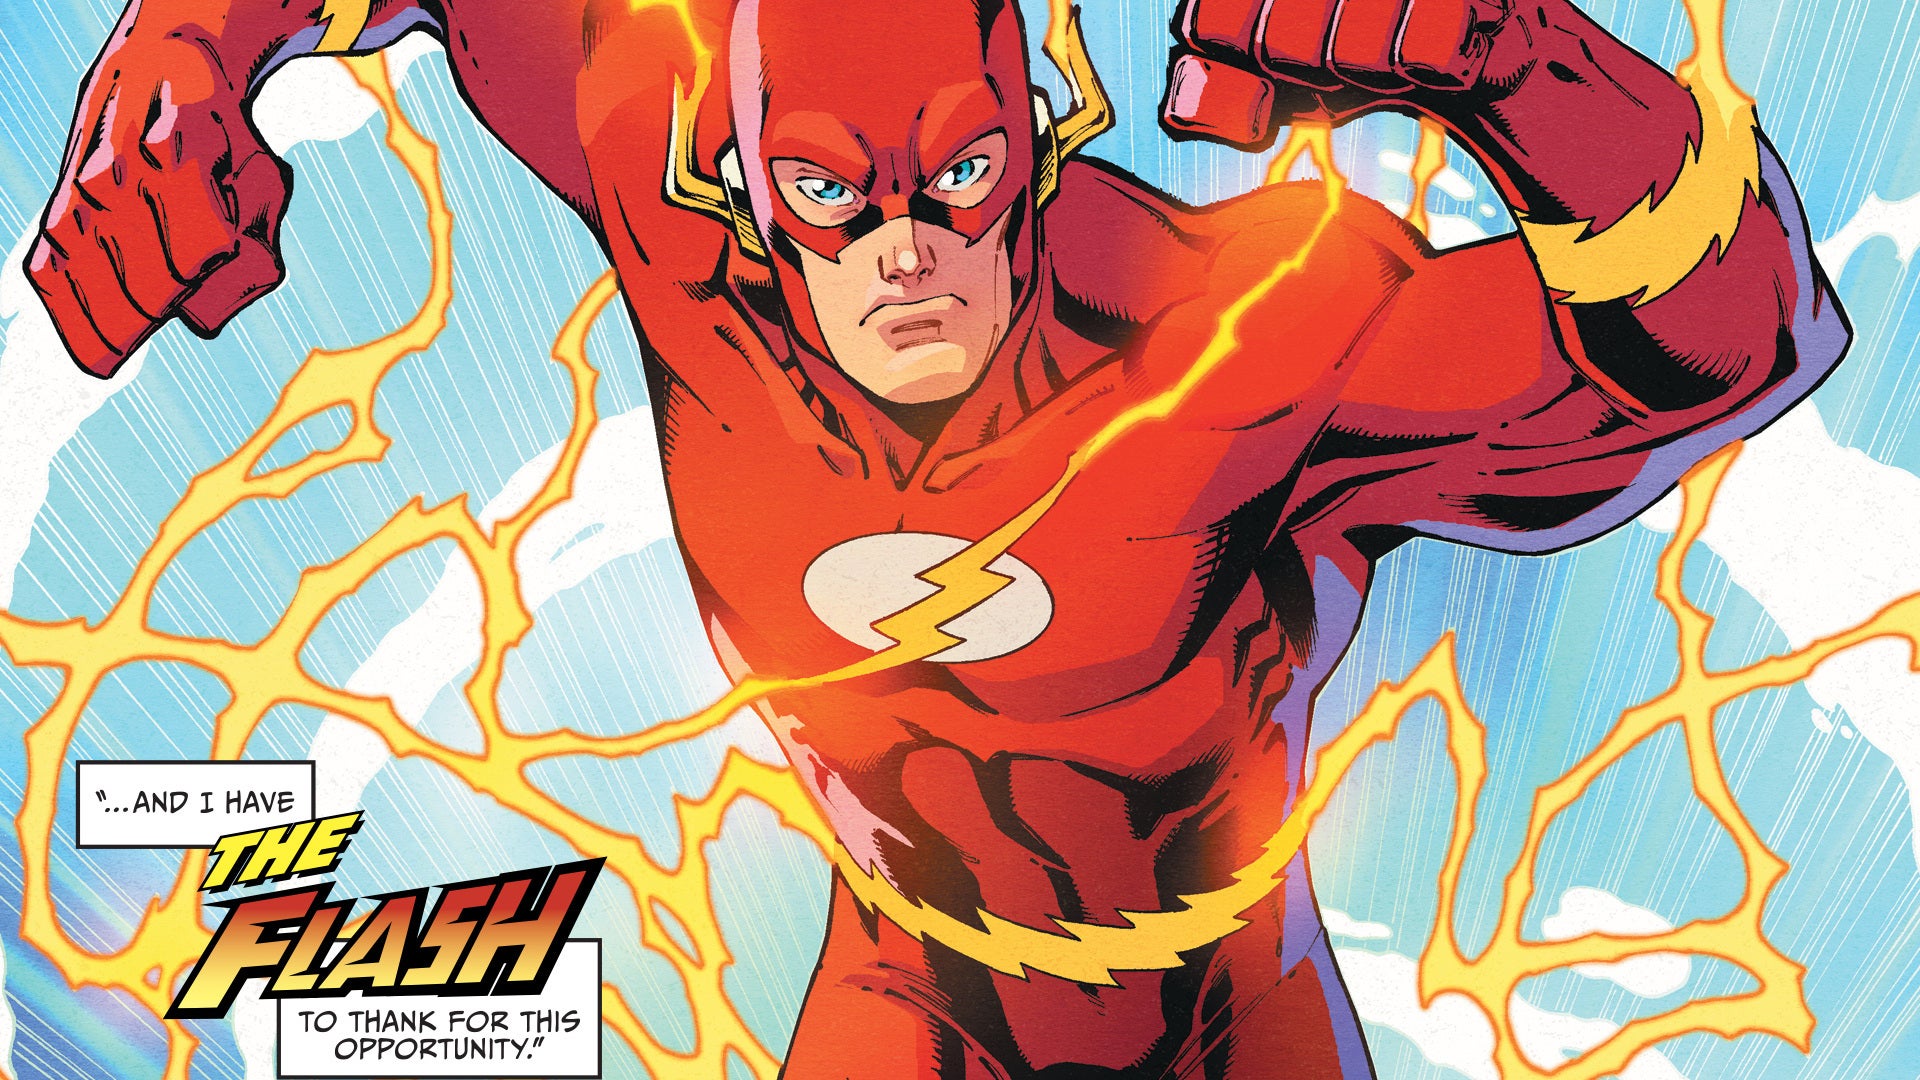 The DC universes across comics, TV, and movies are changing big this year – and once again, the Flash is to thank (or is it blame?)